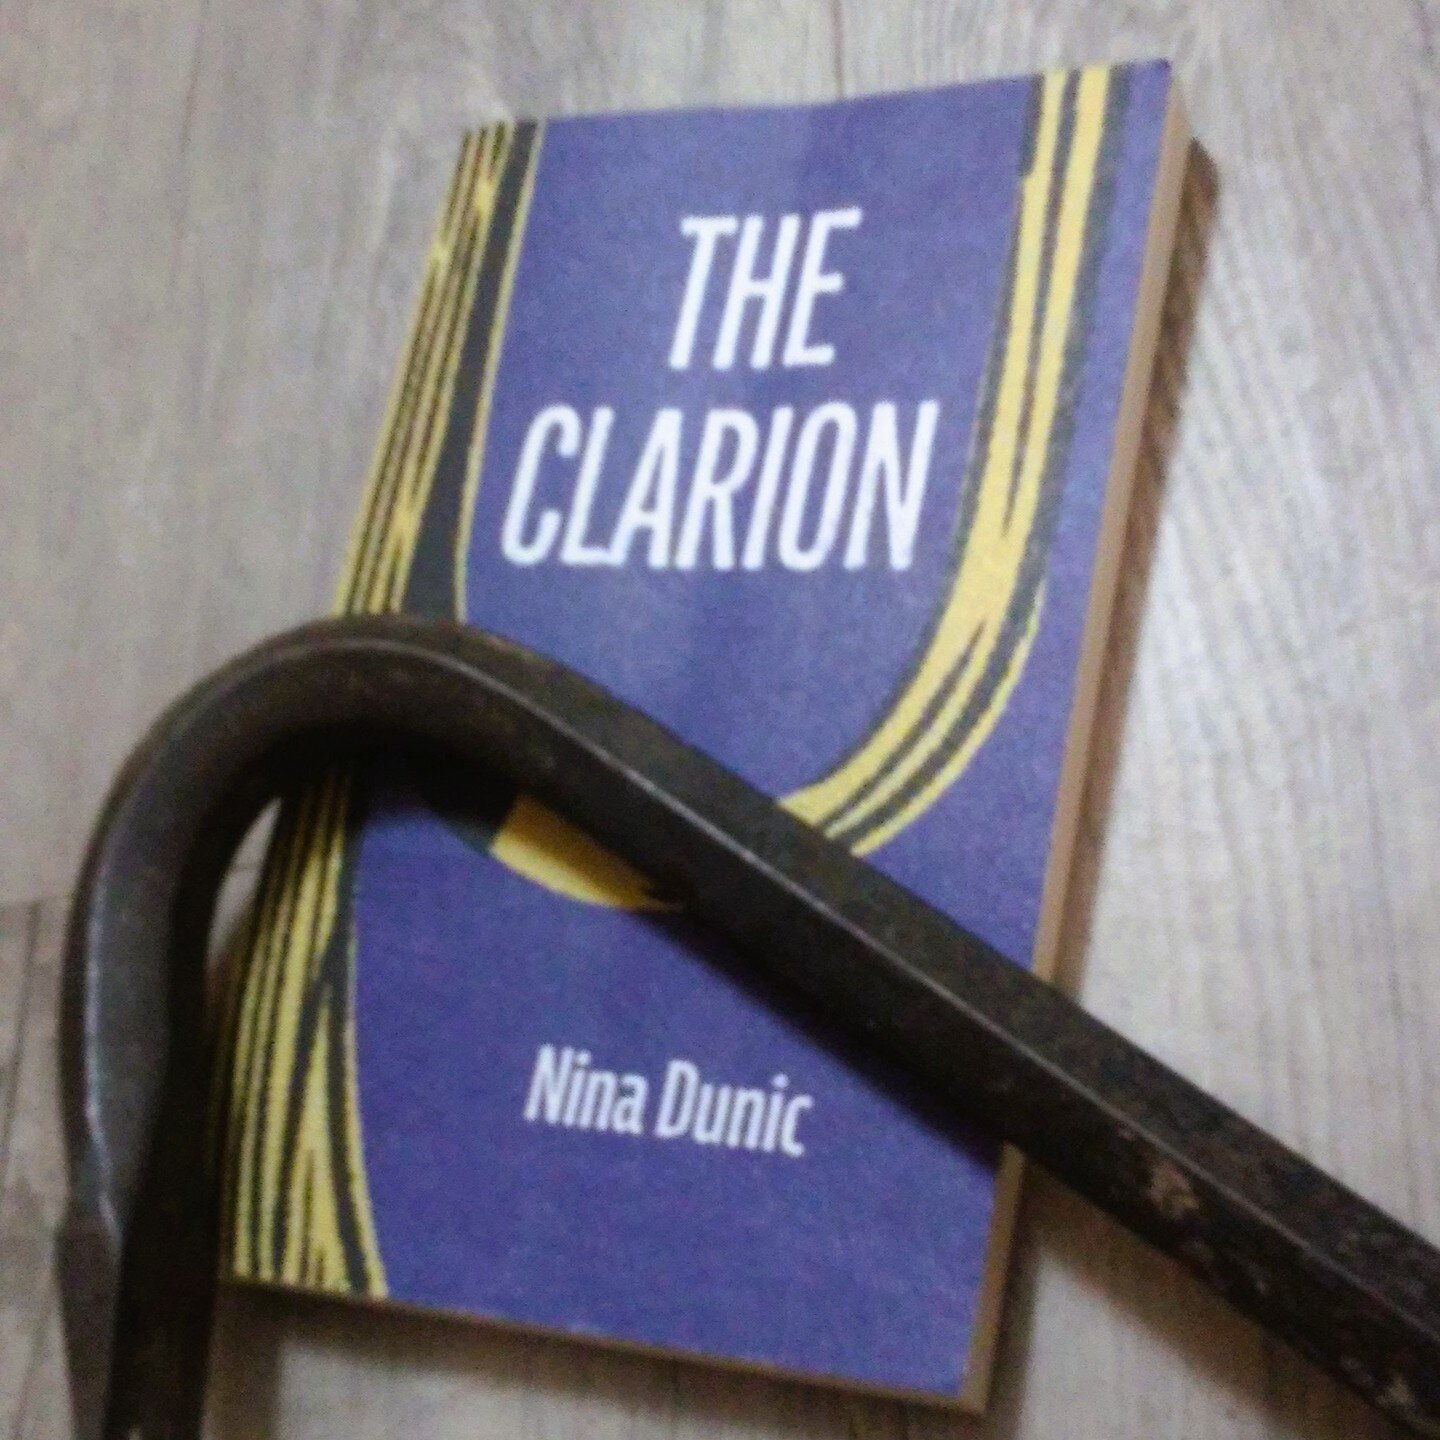 The Clarion by Nina Dunic

&quot;He seemed to hate most people, yet he was astonishingly sensitive in every regard, and I struggled to understand that, let alone see it as a cause. It was a mistake to think sensitive people would always be kind. I th